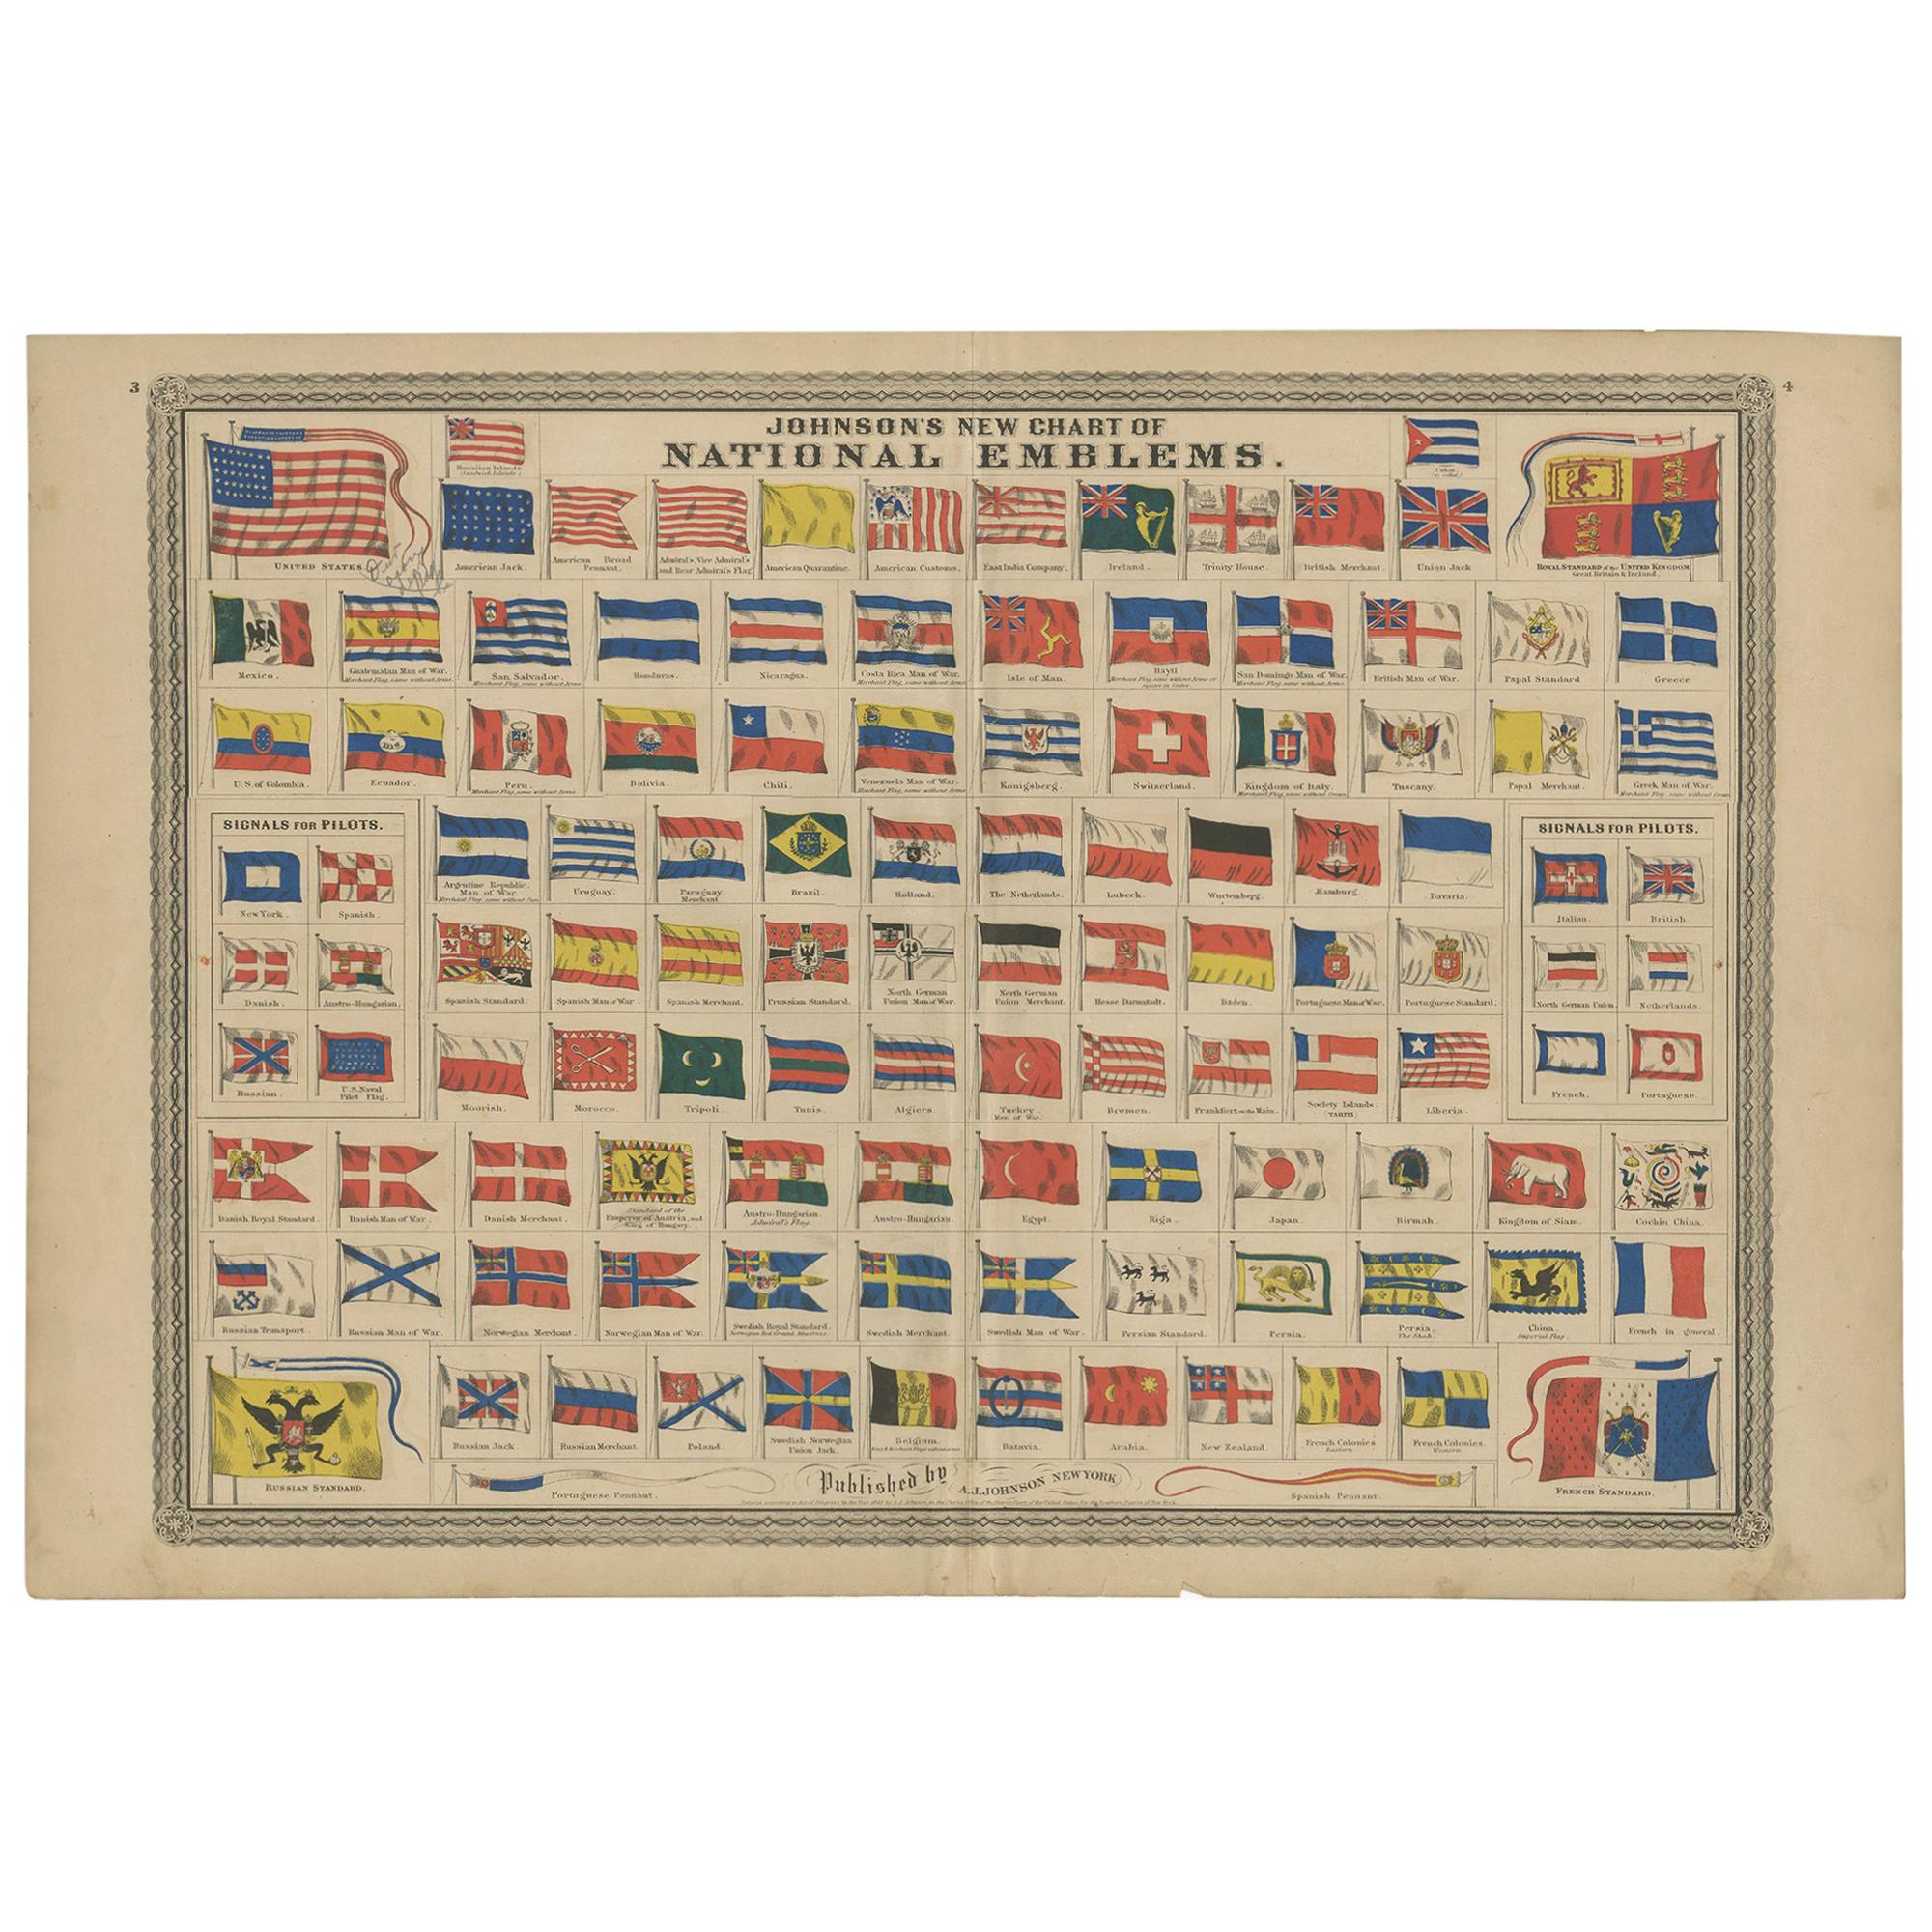 Antique Chart of National Emblems by Johnson, 1872